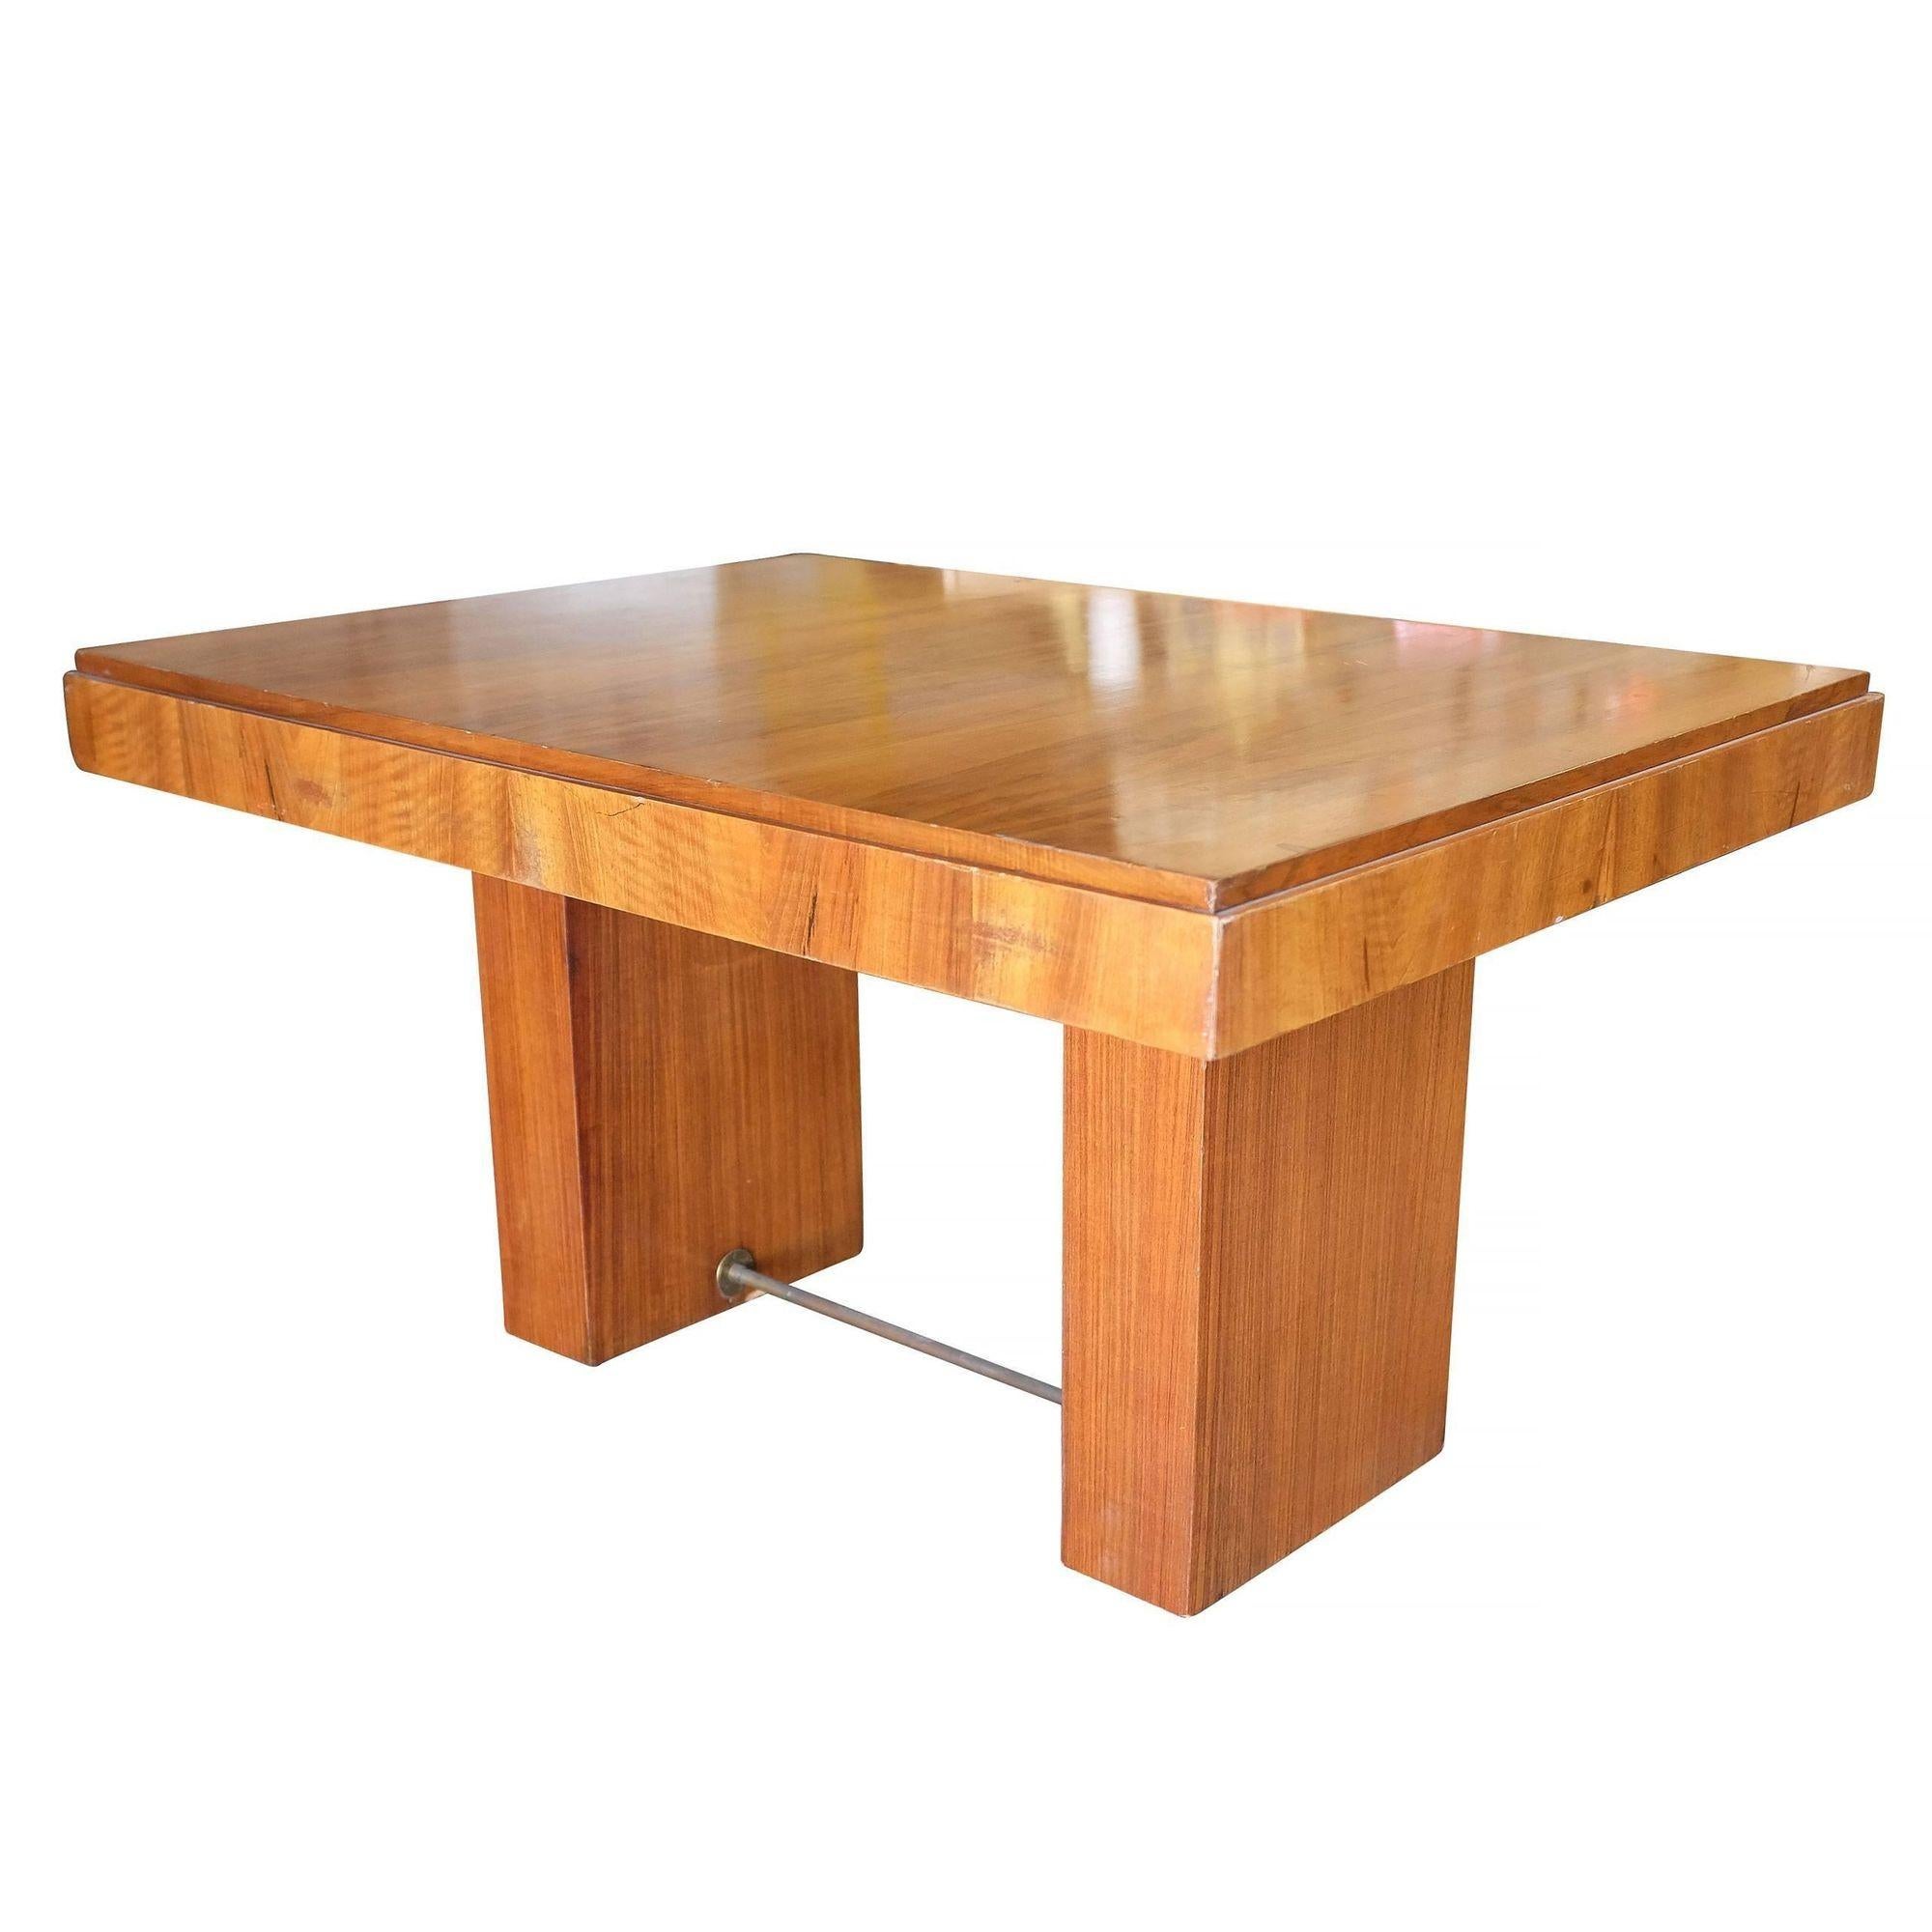 Art Deco Charles Dudouyt Cubist Inspired Walnut Desk / Dining Table For Sale